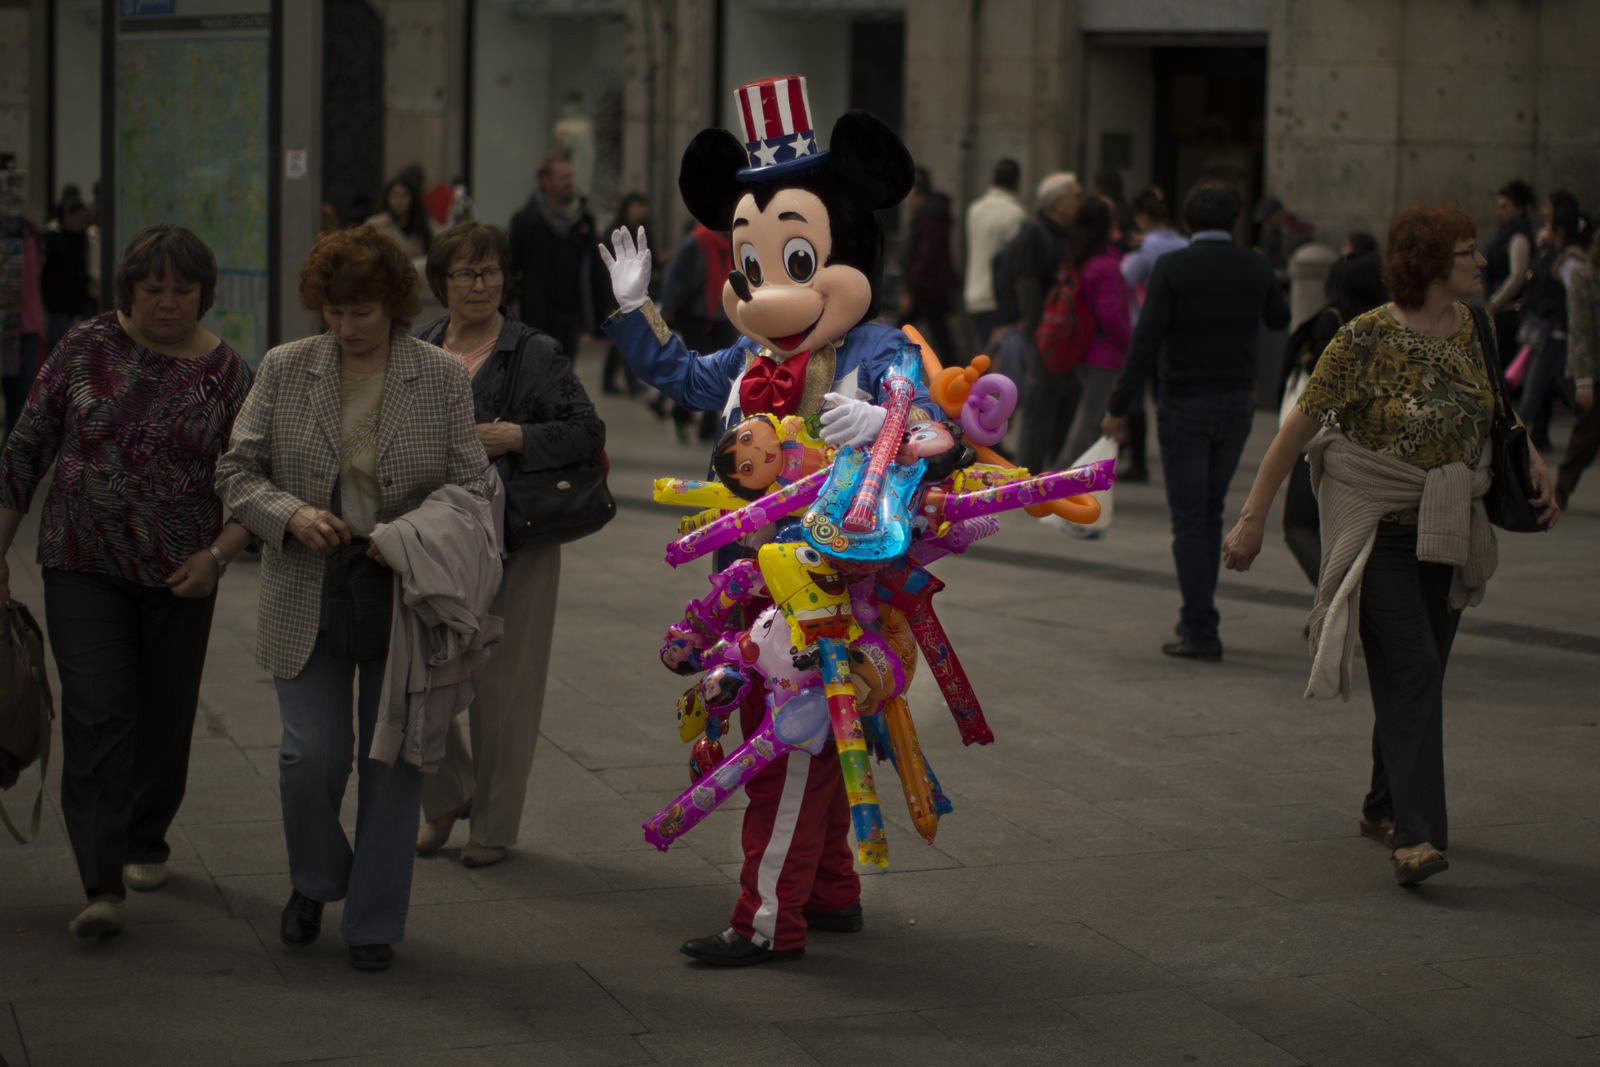 A man sells balloons wearing a Mickey Mouse costume with an US flag on his hat in a tourist area in Madrid, Spain.  (AP/Andres Kudacki)